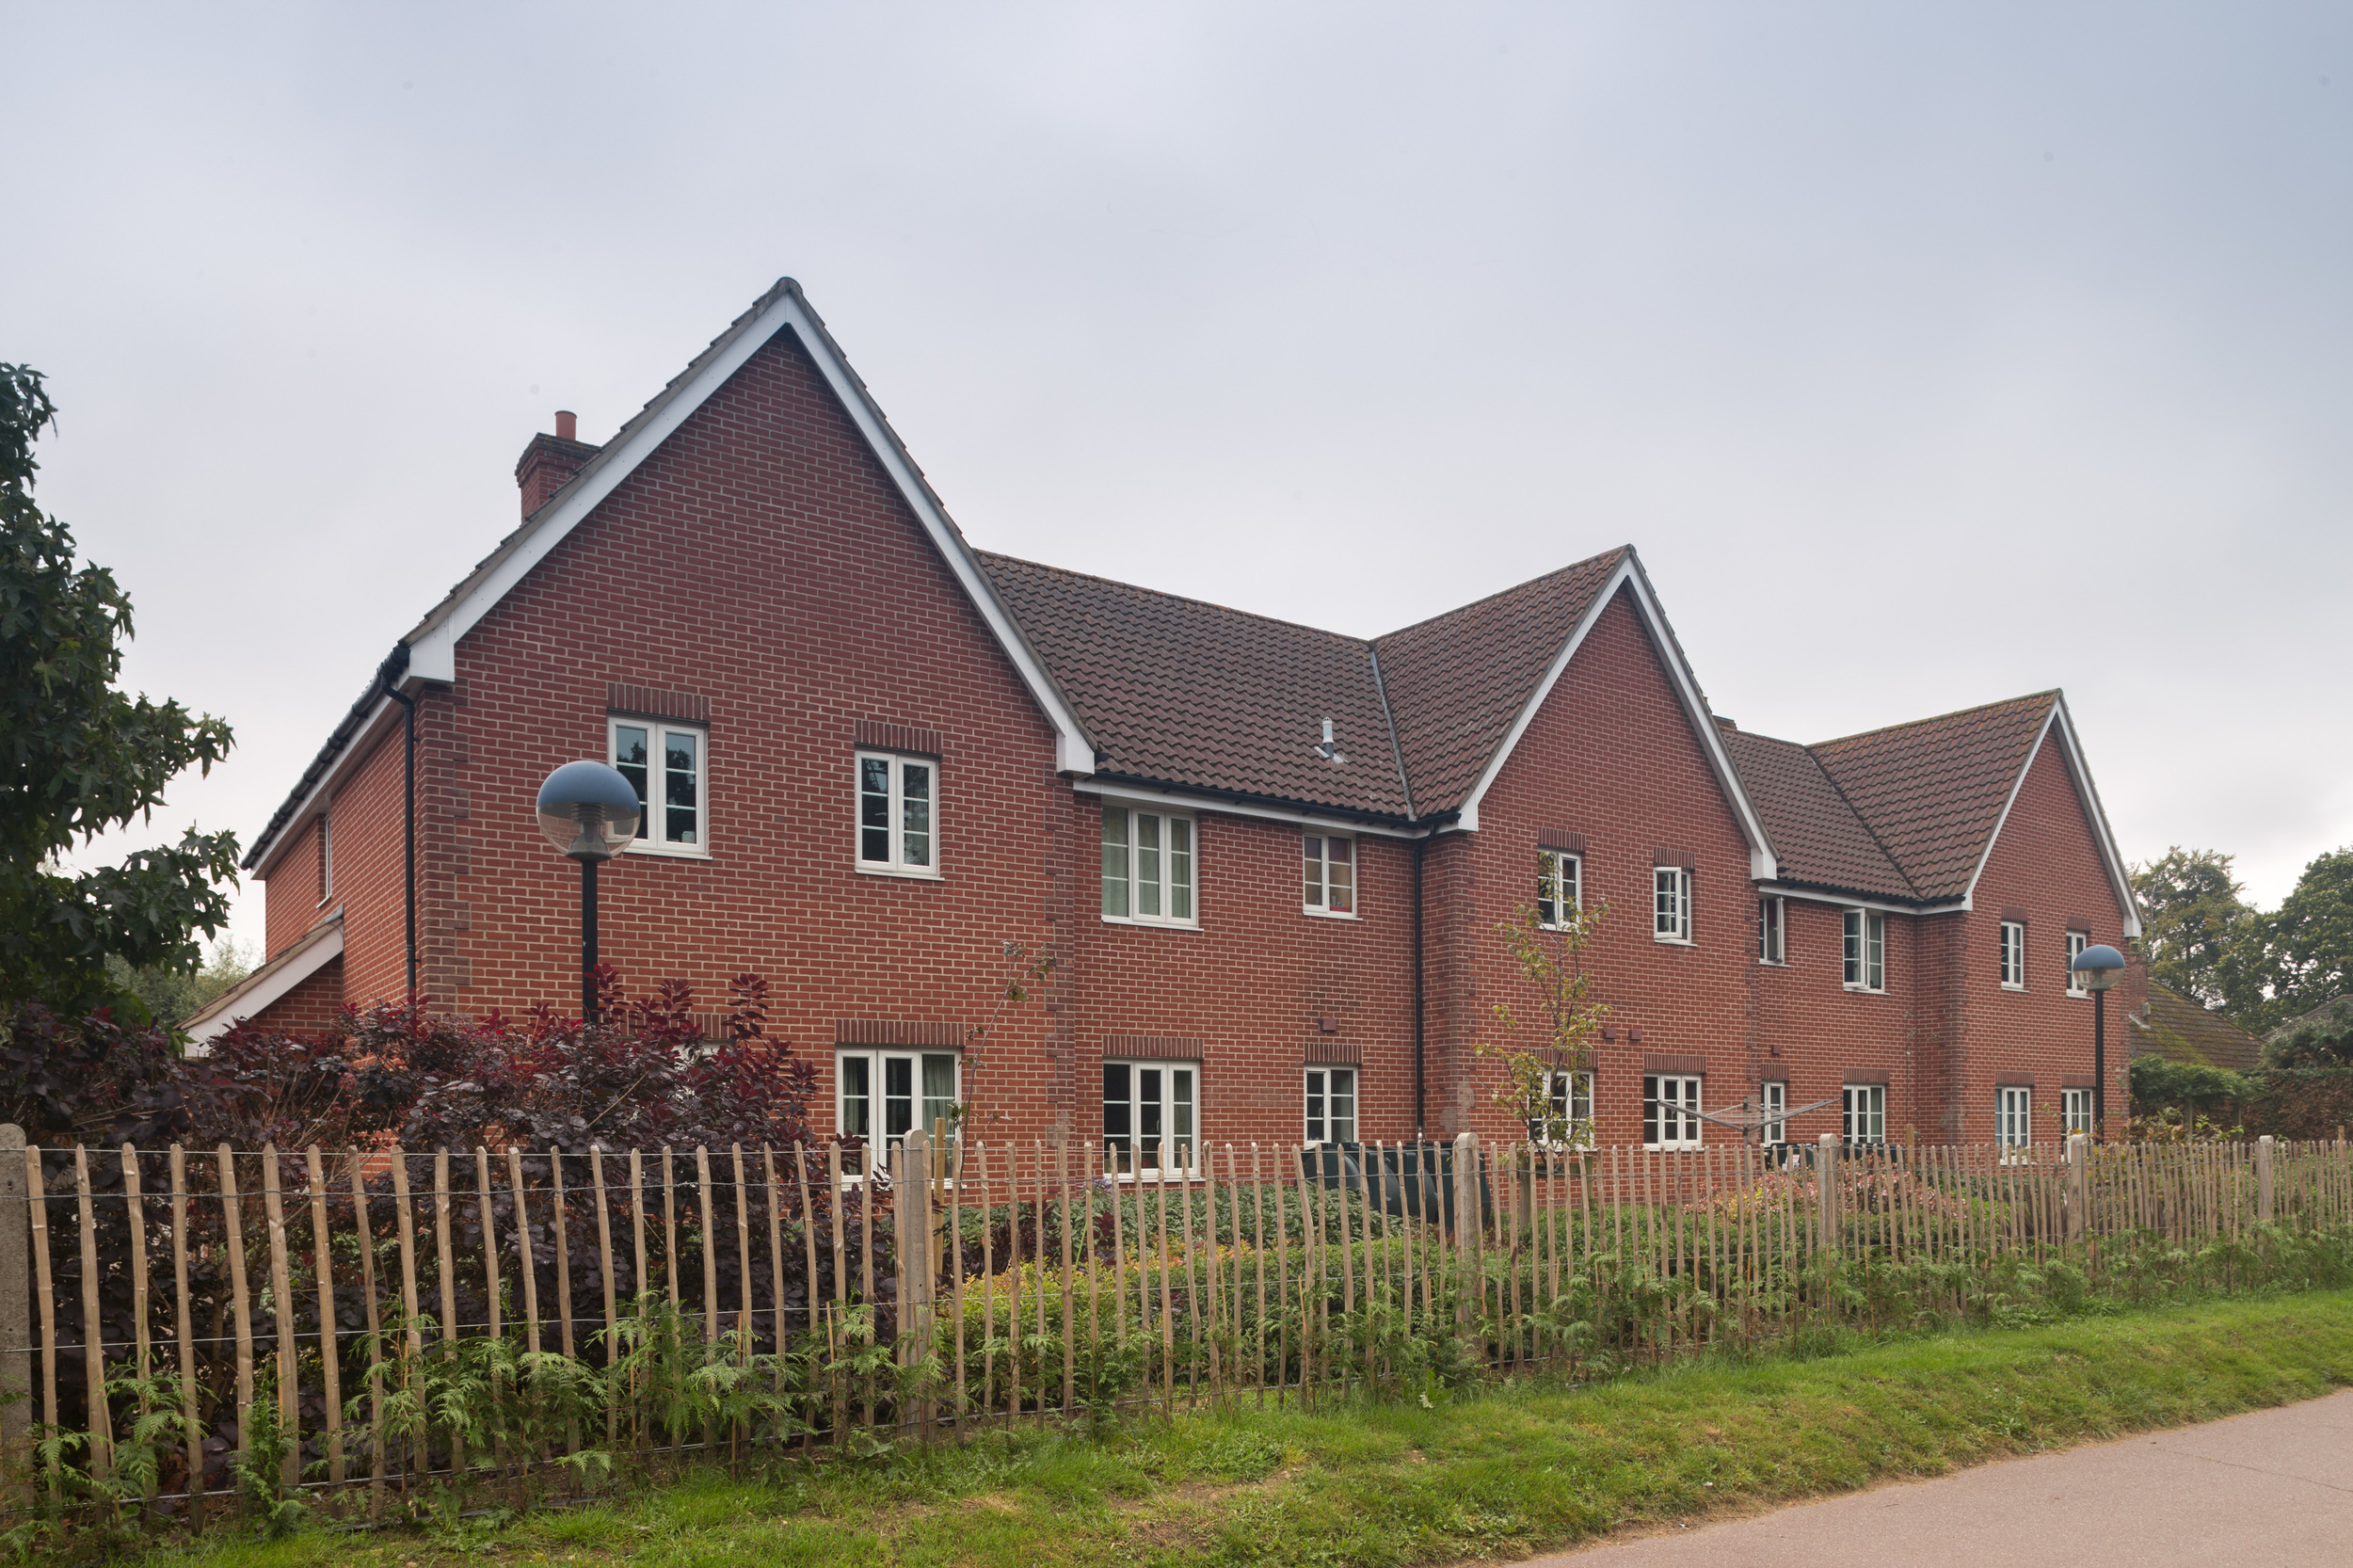     A mixed used development consisting of a church hall and ancillary accommodation for community events; office accommodation for the client, and residential flats.  